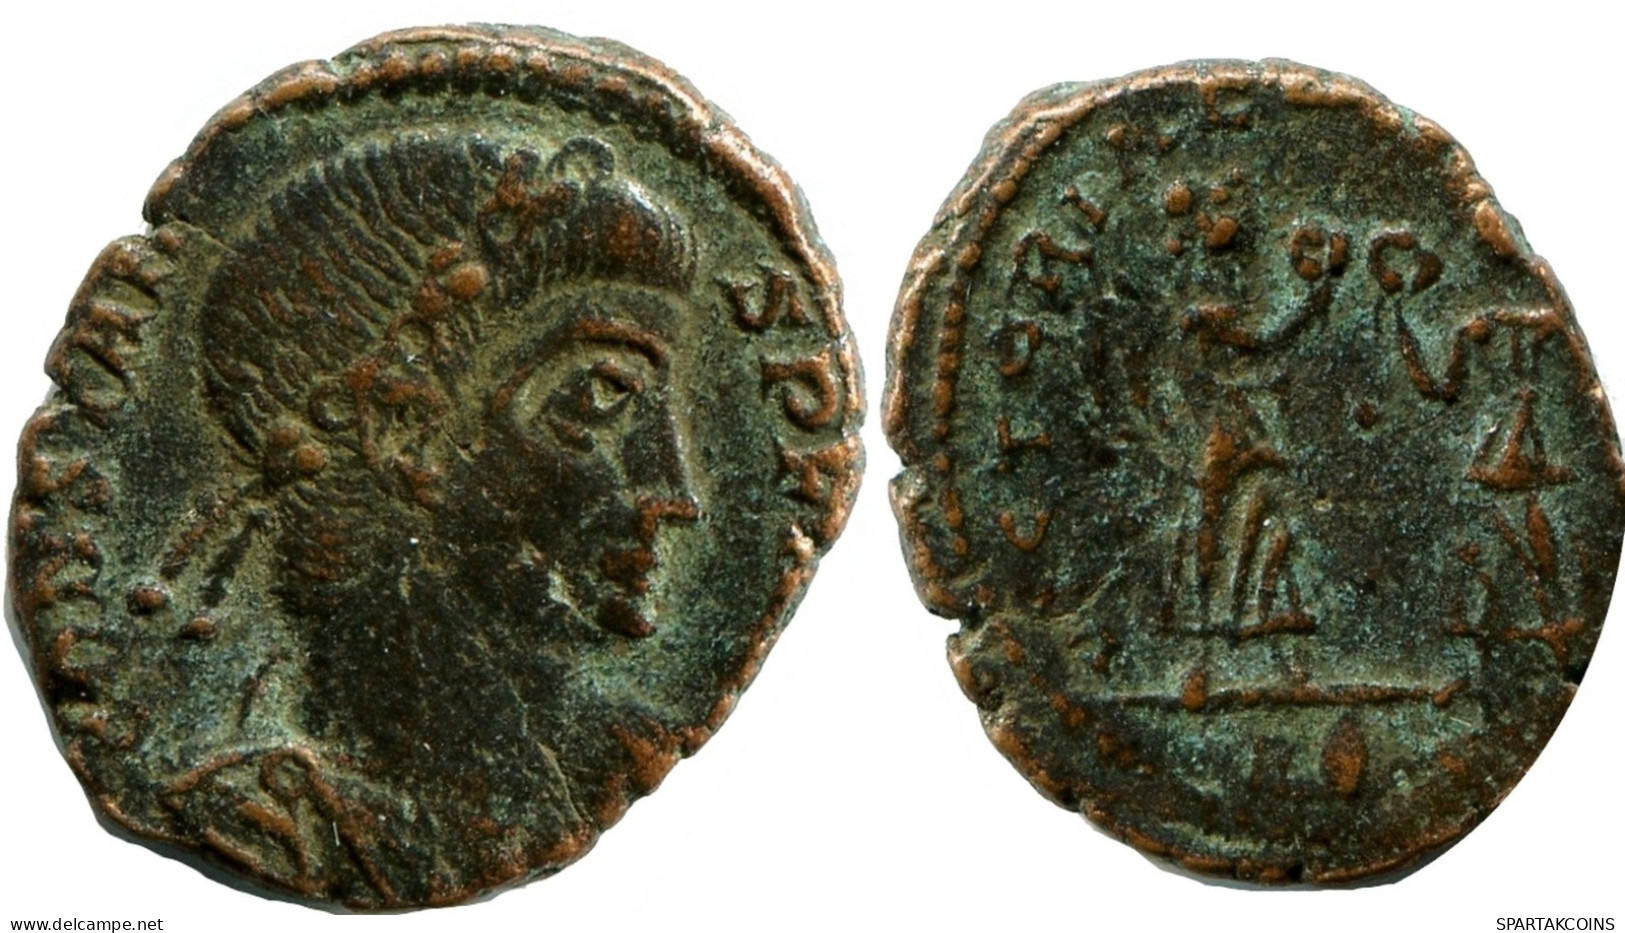 CONSTANS MINTED IN ROME ITALY FROM THE ROYAL ONTARIO MUSEUM #ANC11516.14.D.A - El Imperio Christiano (307 / 363)